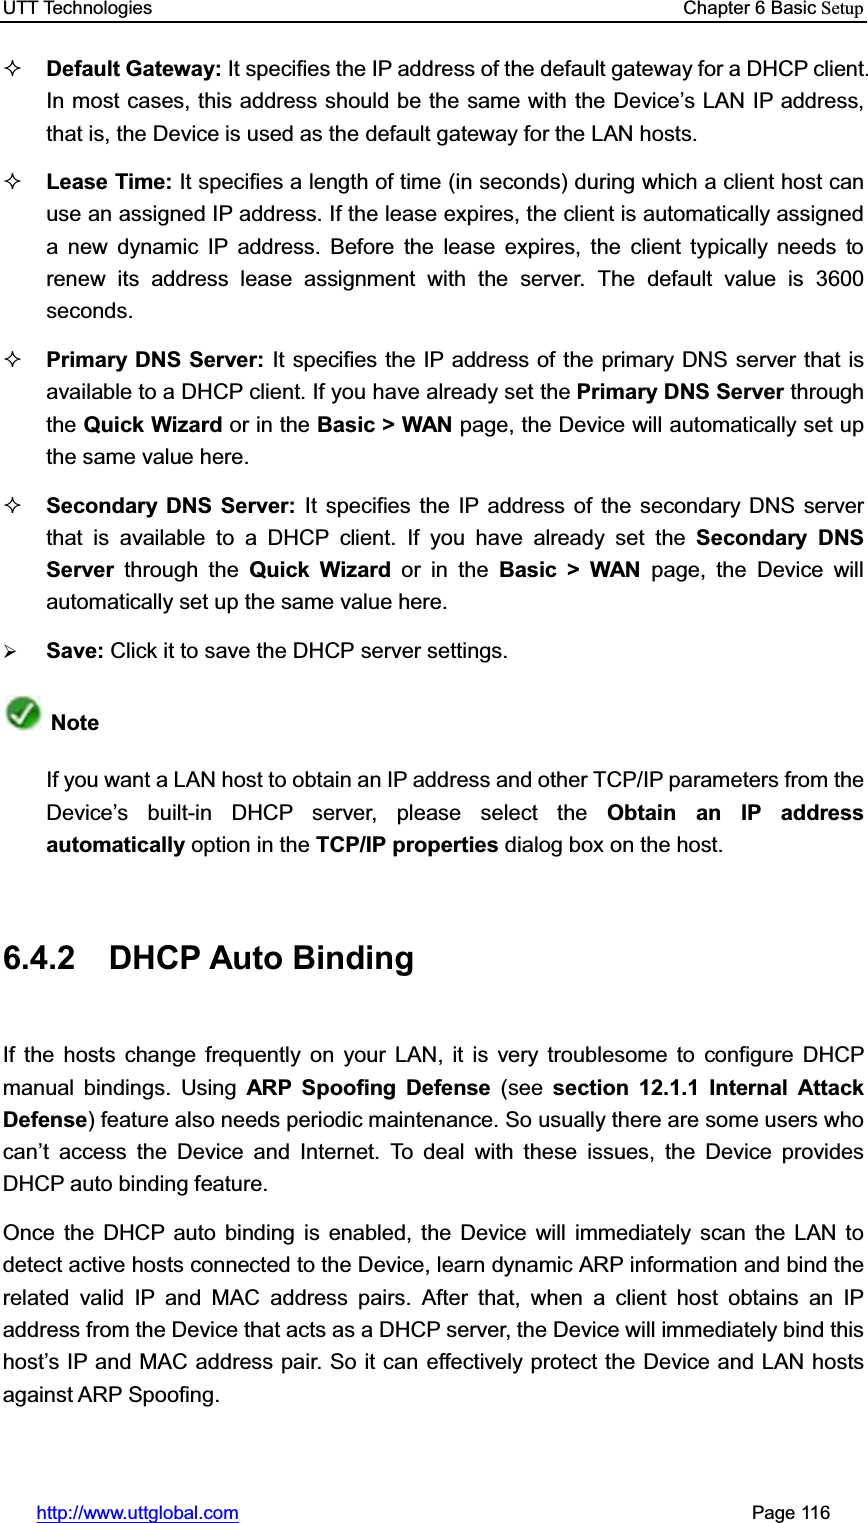 UTT Technologies    Chapter 6 Basic Setuphttp://www.uttglobal.com                                                       Page 116 Default Gateway: It specifies the IP address of the default gateway for a DHCP client. In most cases, this address should be the same with the Device¶s LAN IP address, that is, the Device is used as the default gateway for the LAN hosts. Lease Time: It specifies a length of time (in seconds) during which a client host can use an assigned IP address. If the lease expires, the client is automatically assigned a new dynamic IP address. Before the lease expires, the client typically needs to renew its address lease assignment with the server. The default value is 3600 seconds. Primary DNS Server: It specifies the IP address of the primary DNS server that is available to a DHCP client. If you have already set the Primary DNS Server throughthe Quick Wizard or in the Basic &gt; WAN page, the Device will automatically set up the same value here. Secondary DNS Server: It specifies the IP address of the secondary DNS server that is available to a DHCP client. If you have already set the Secondary DNS Server through the Quick Wizard or in the Basic &gt; WAN page, the Device will automatically set up the same value here.¾Save: Click it to save the DHCP server settings.Note If you want a LAN host to obtain an IP address and other TCP/IP parameters from the Device¶s built-in DHCP server, please select the Obtain an IP address automatically option in the TCP/IP properties dialog box on the host. 6.4.2 DHCP Auto Binding If the hosts change frequently on your LAN, it is very troublesome to configure DHCP manual bindings. Using ARP Spoofing Defense (see section 12.1.1 Internal Attack Defense) feature also needs periodic maintenance. So usually there are some users who can¶t access the Device and Internet. To deal with these issues, the Device provides DHCP auto binding feature. Once the DHCP auto binding is enabled, the Device will immediately scan the LAN to detect active hosts connected to the Device, learn dynamic ARP information and bind the related valid IP and MAC address pairs. After that, when a client host obtains an IP address from the Device that acts as a DHCP server, the Device will immediately bind this host¶s IP and MAC address pair. So it can effectively protect the Device and LAN hosts against ARP Spoofing. 